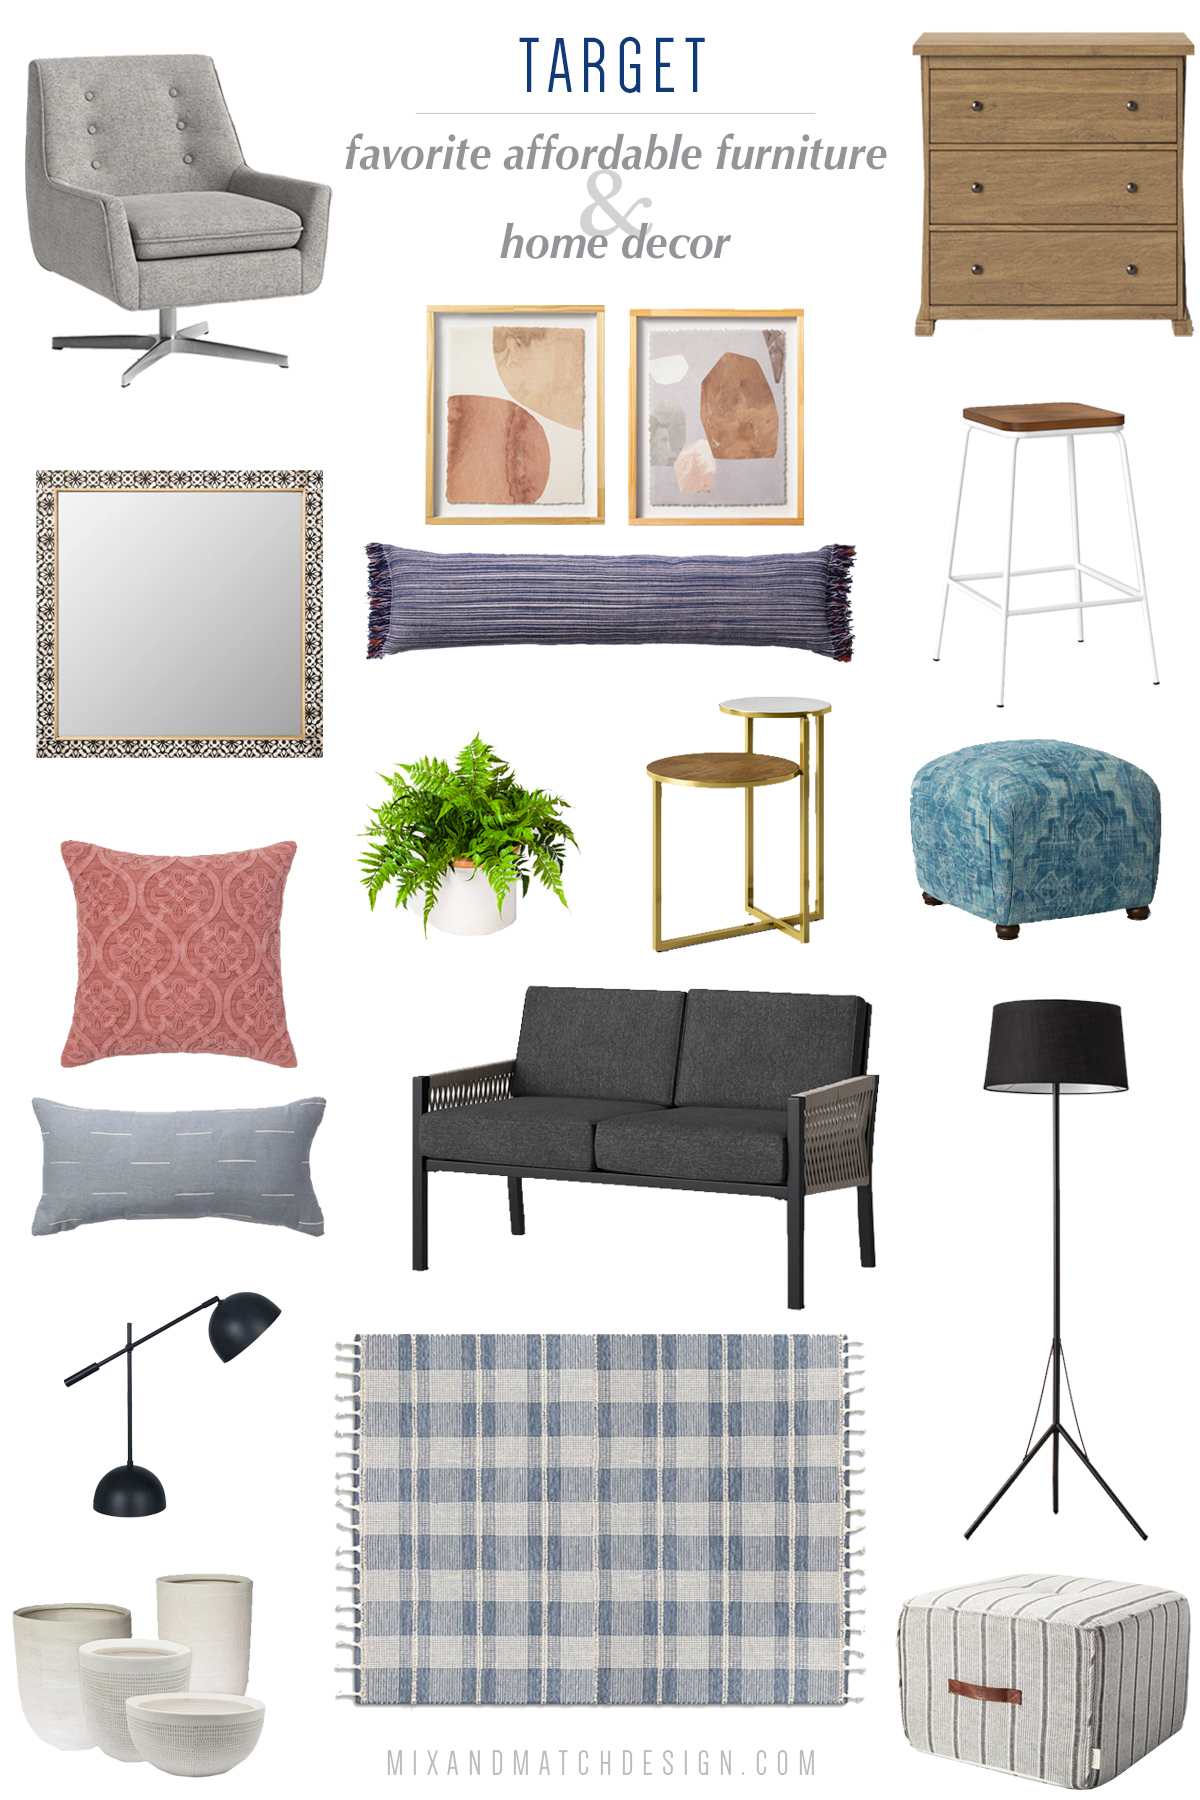 Affordable Decor Ideas From , Walmart, & Target - House Of Hipsters